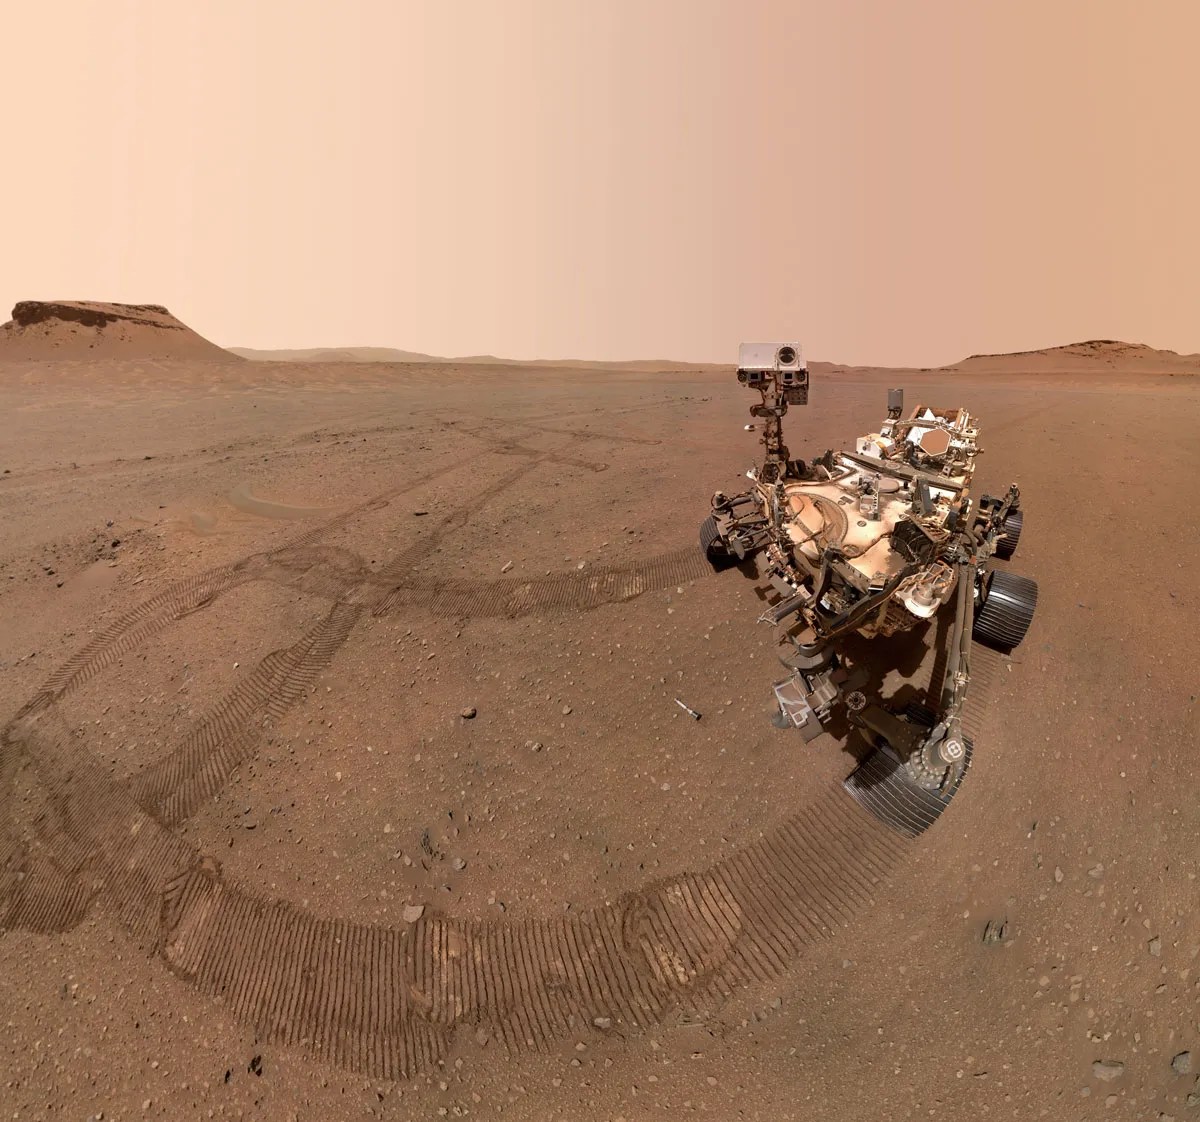 The Perseverance Rover is parked among the tracks it made in the soil of Mars.